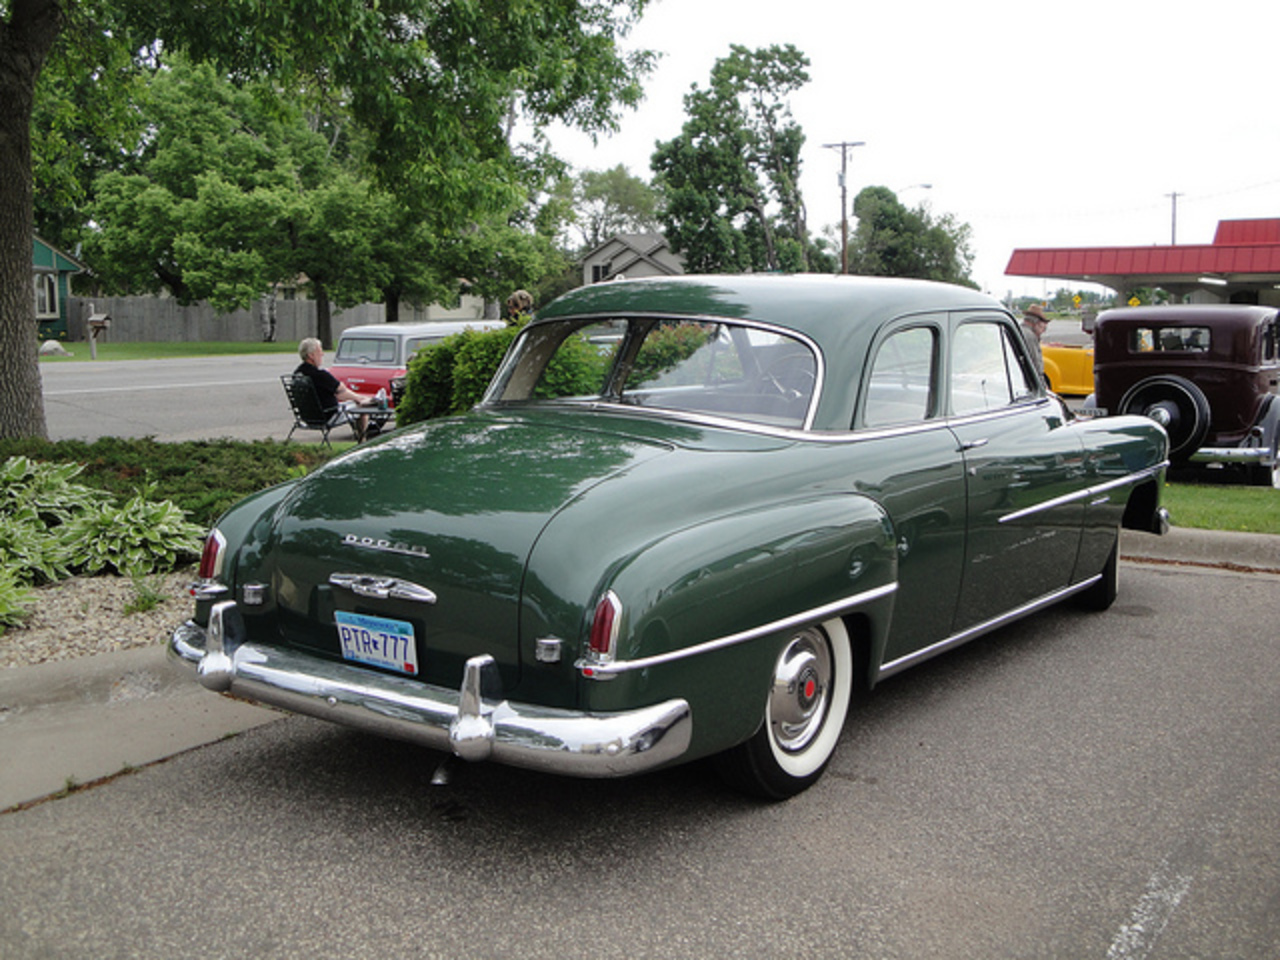 51 Dodge Coronet Club Coupe | Flickr - Photo Sharing!